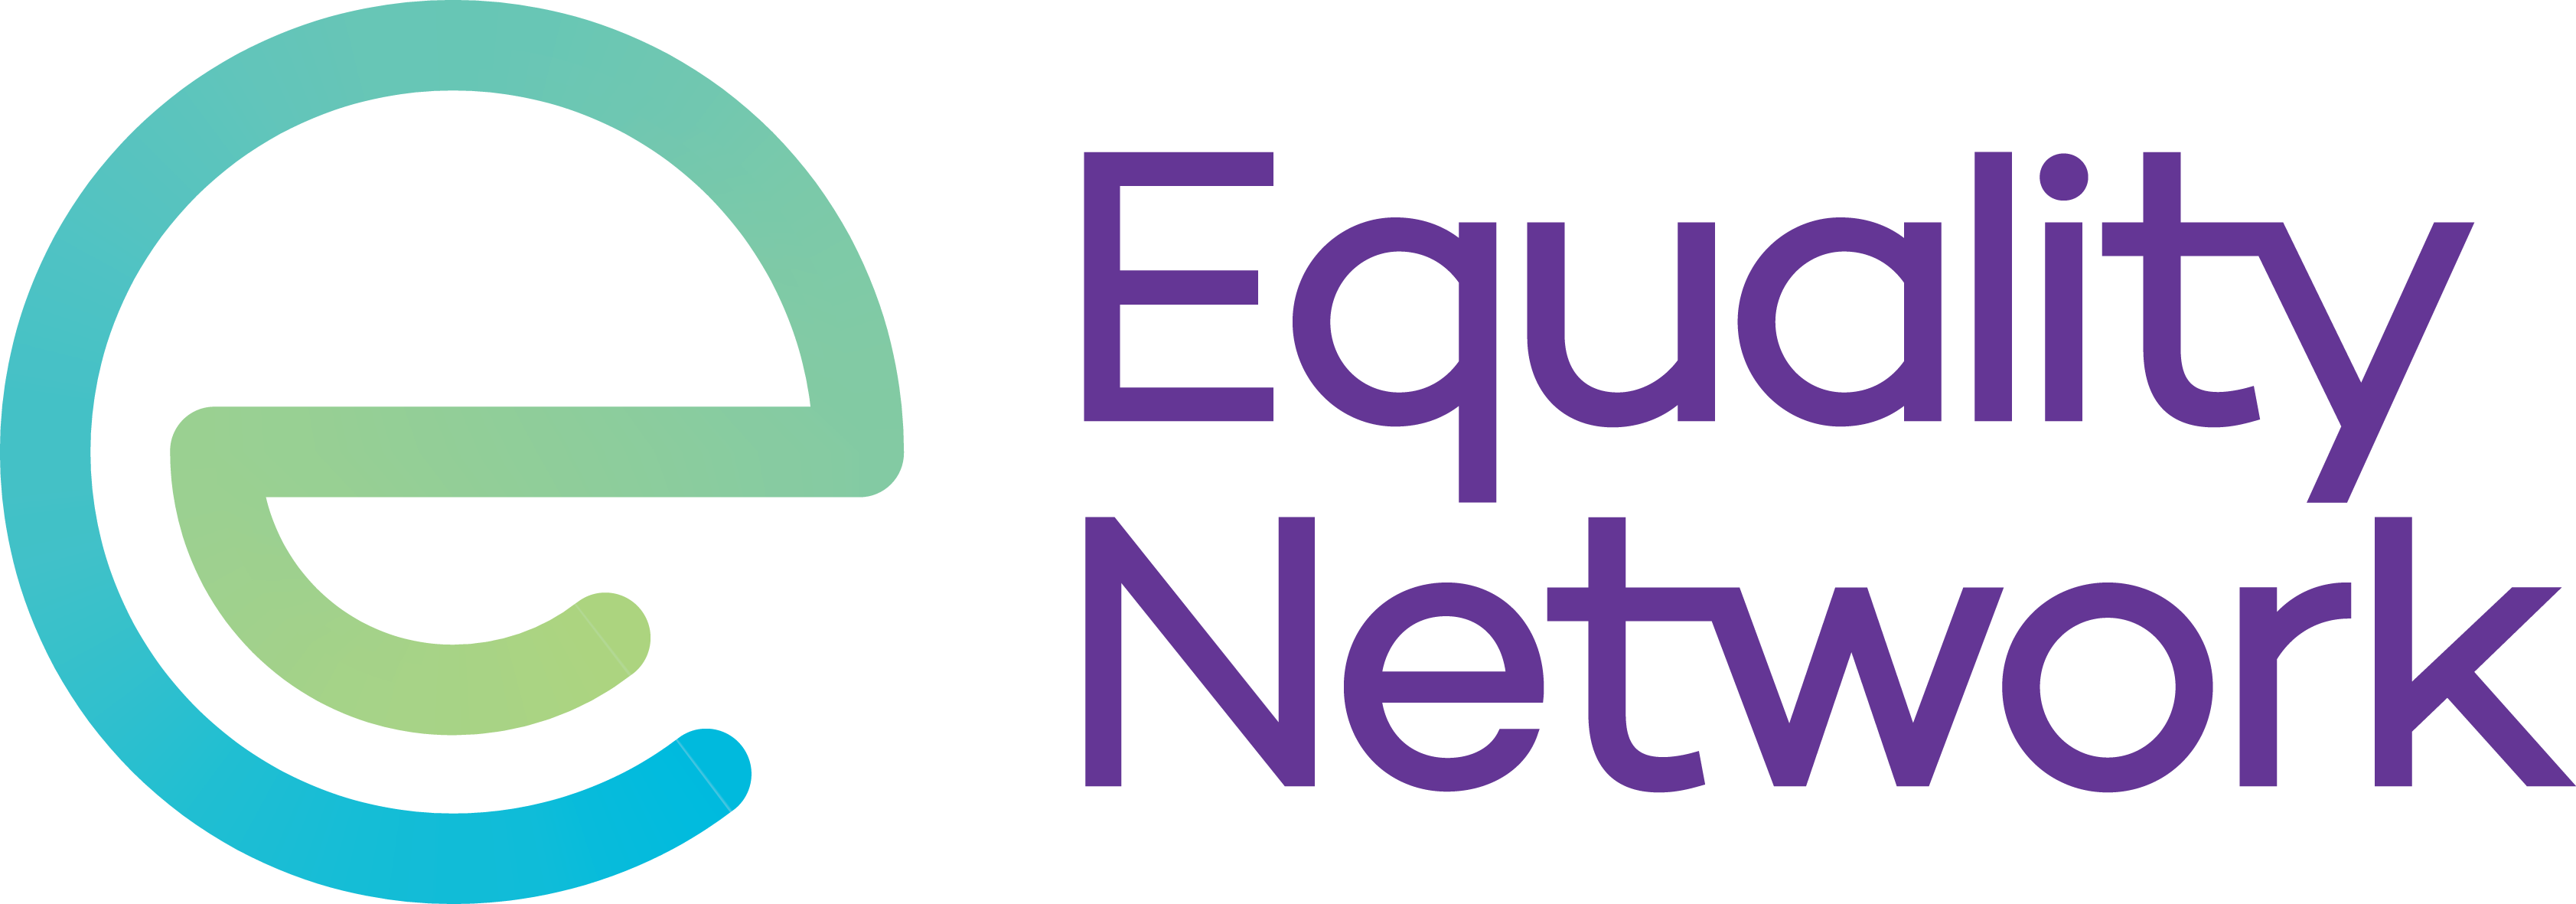 White Text that Says "Equality Network" with an E shaped logo next to it